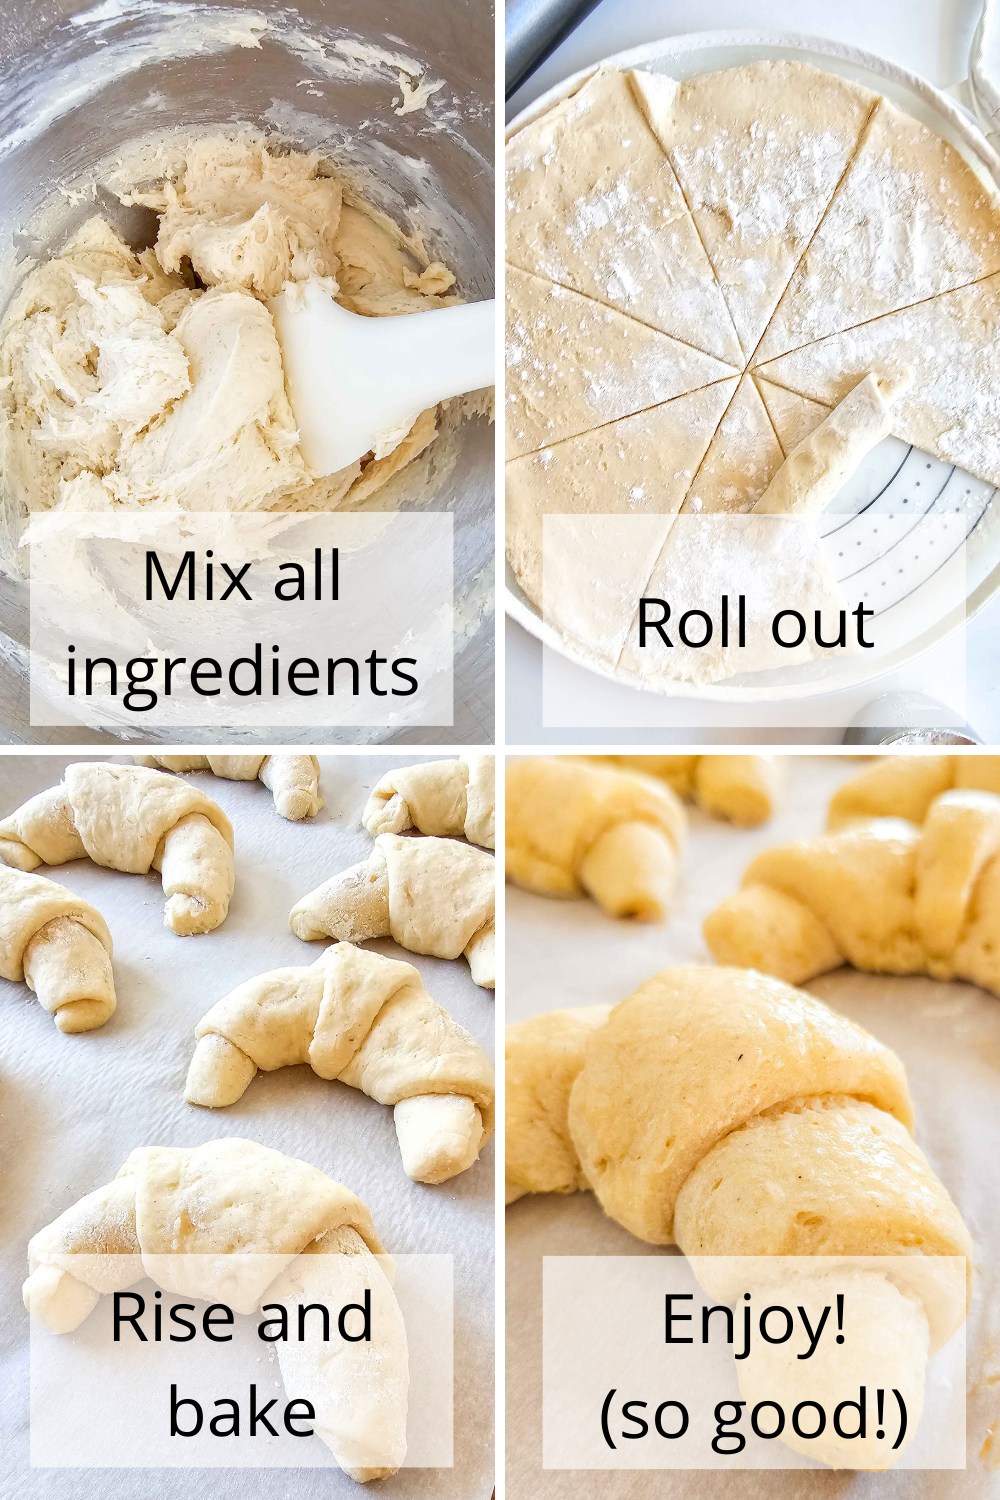 https://thereislifeafterwheat.com/wp-content/uploads/2014/11/How-to-Make-Gluten-Free-Crescent-Rolls.png